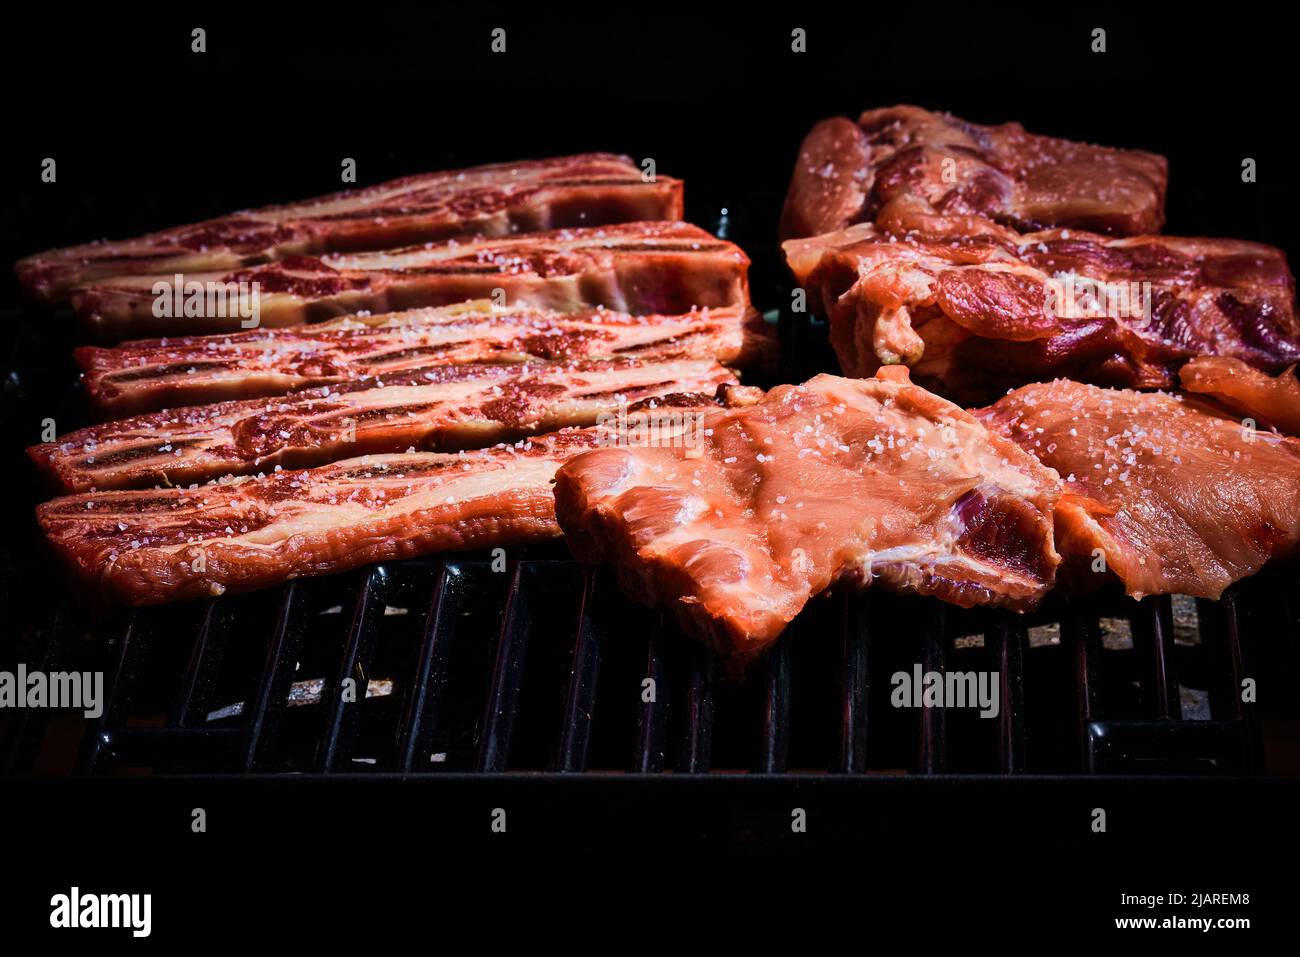 Beef rib and pork rib freshly put on the barbecue to start grilling Stock Photo